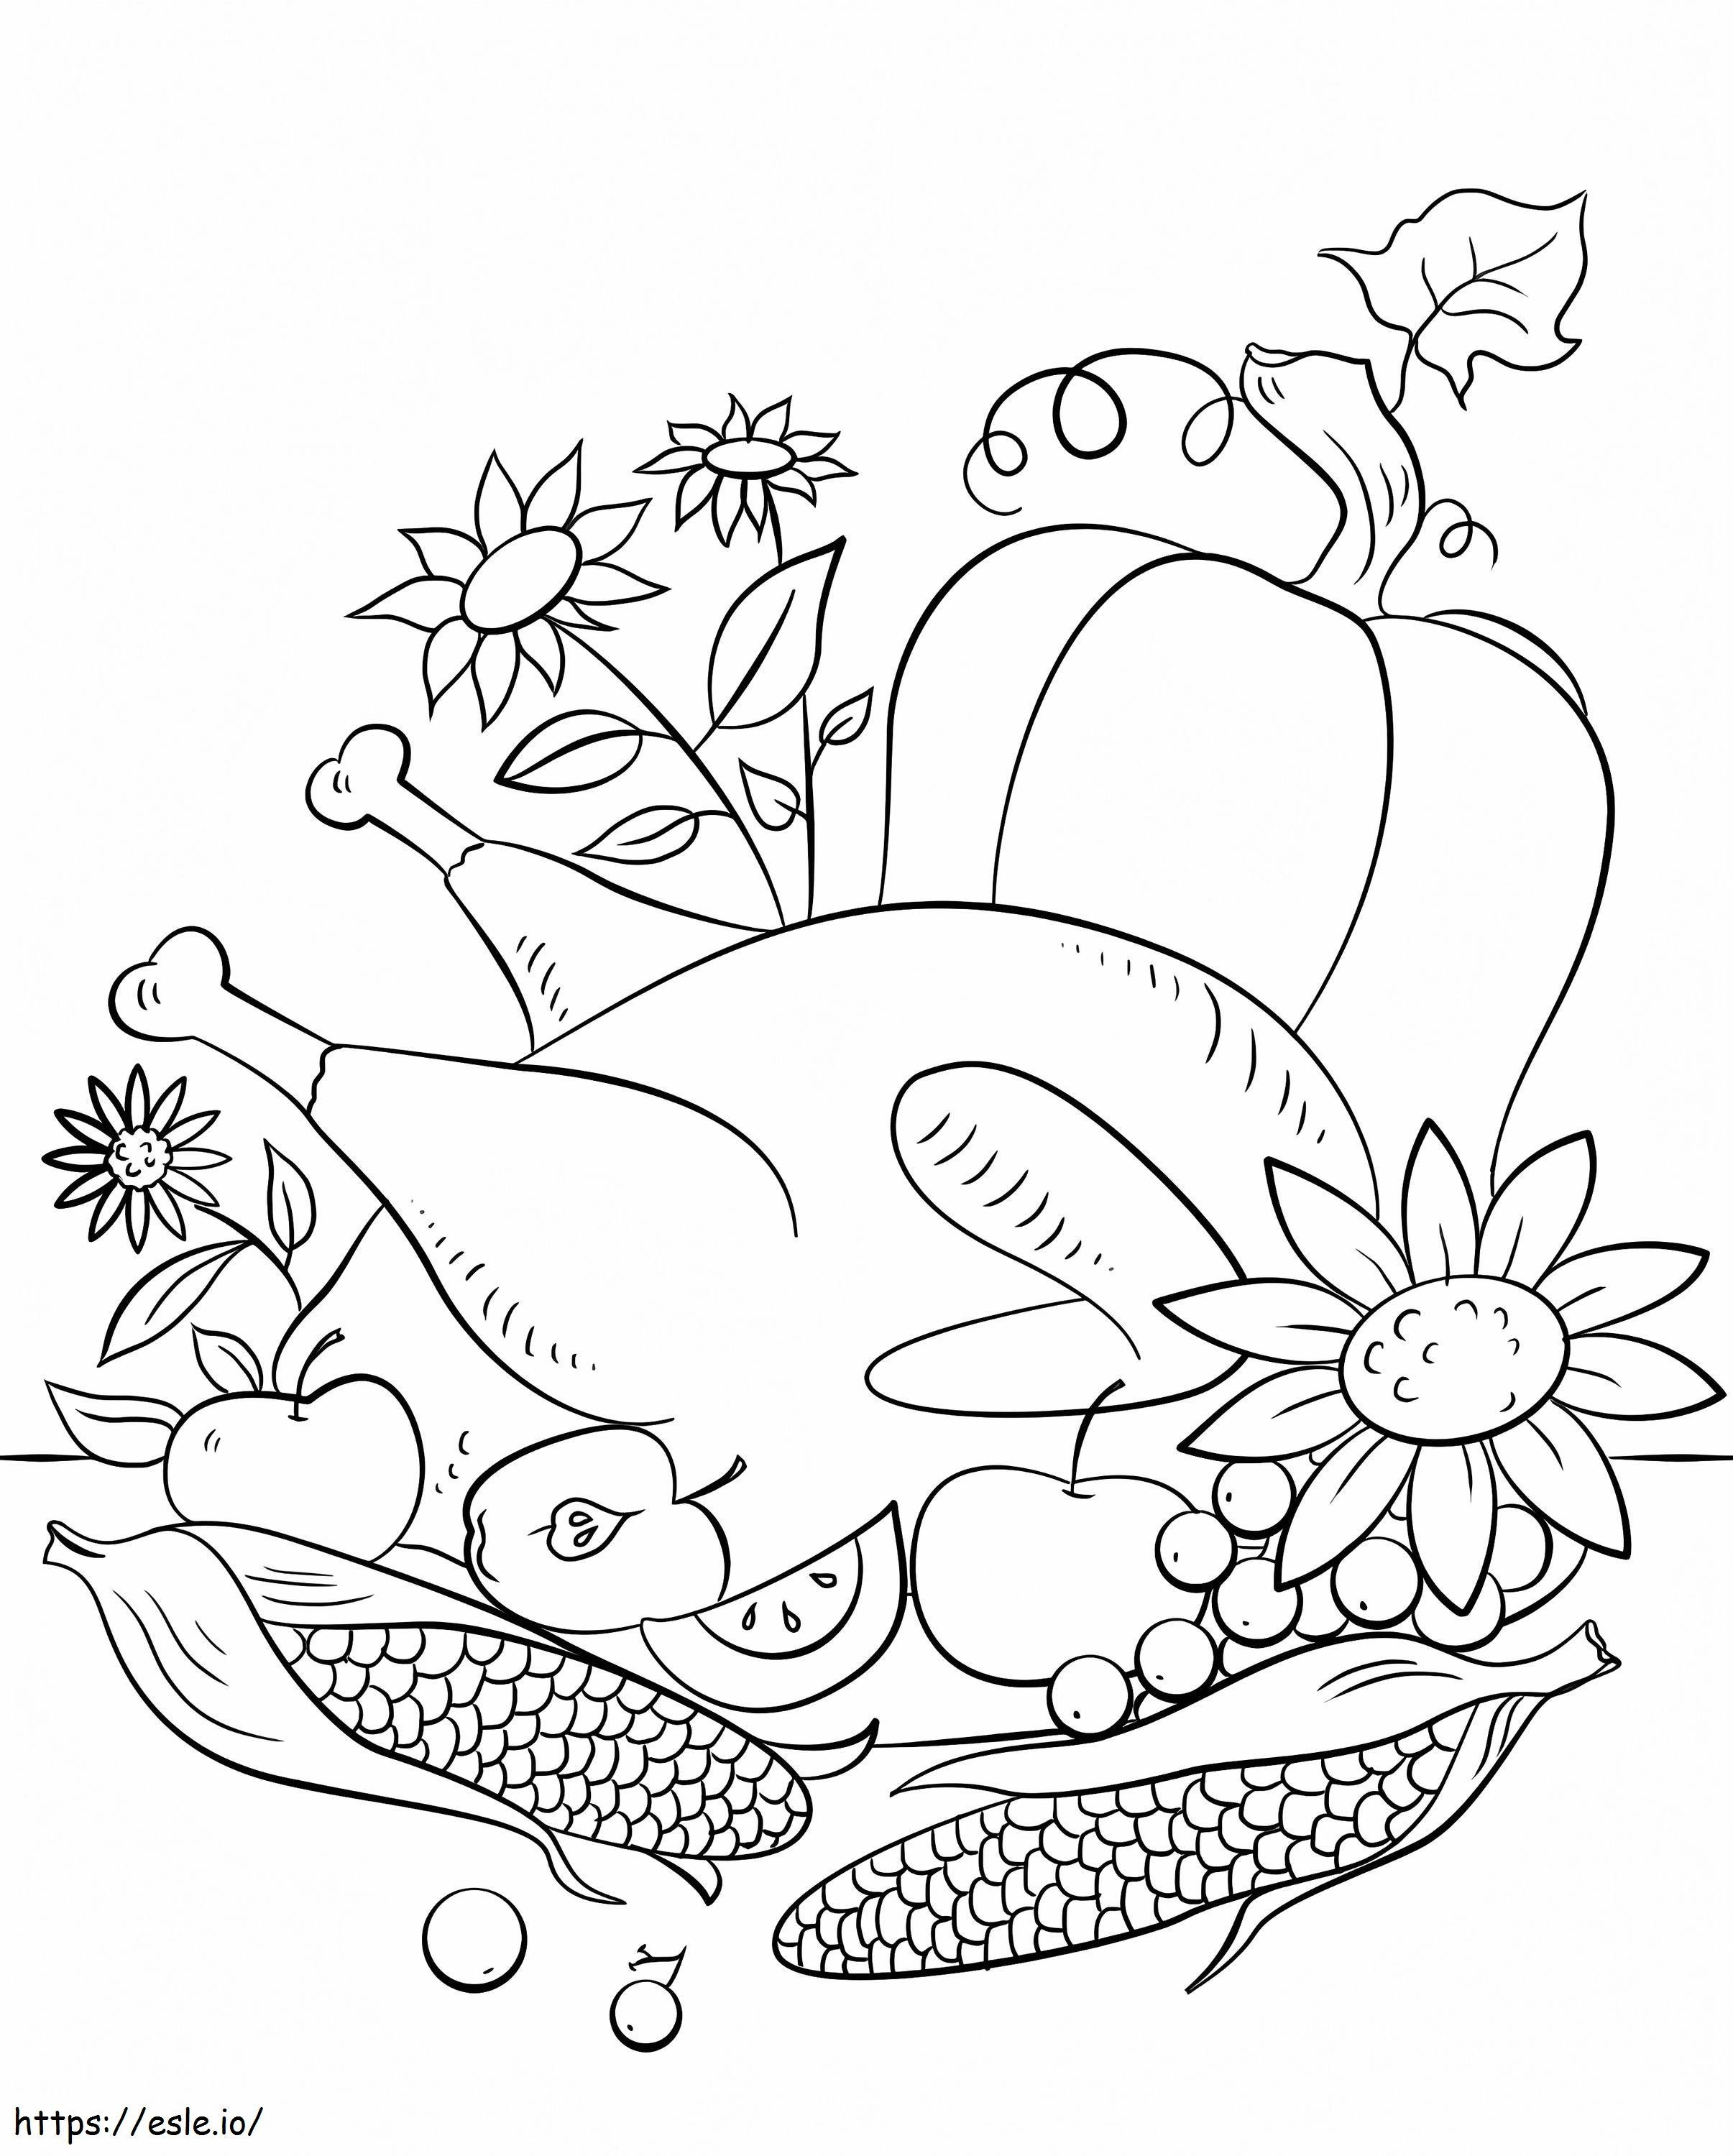 Thanksgiving Food coloring page